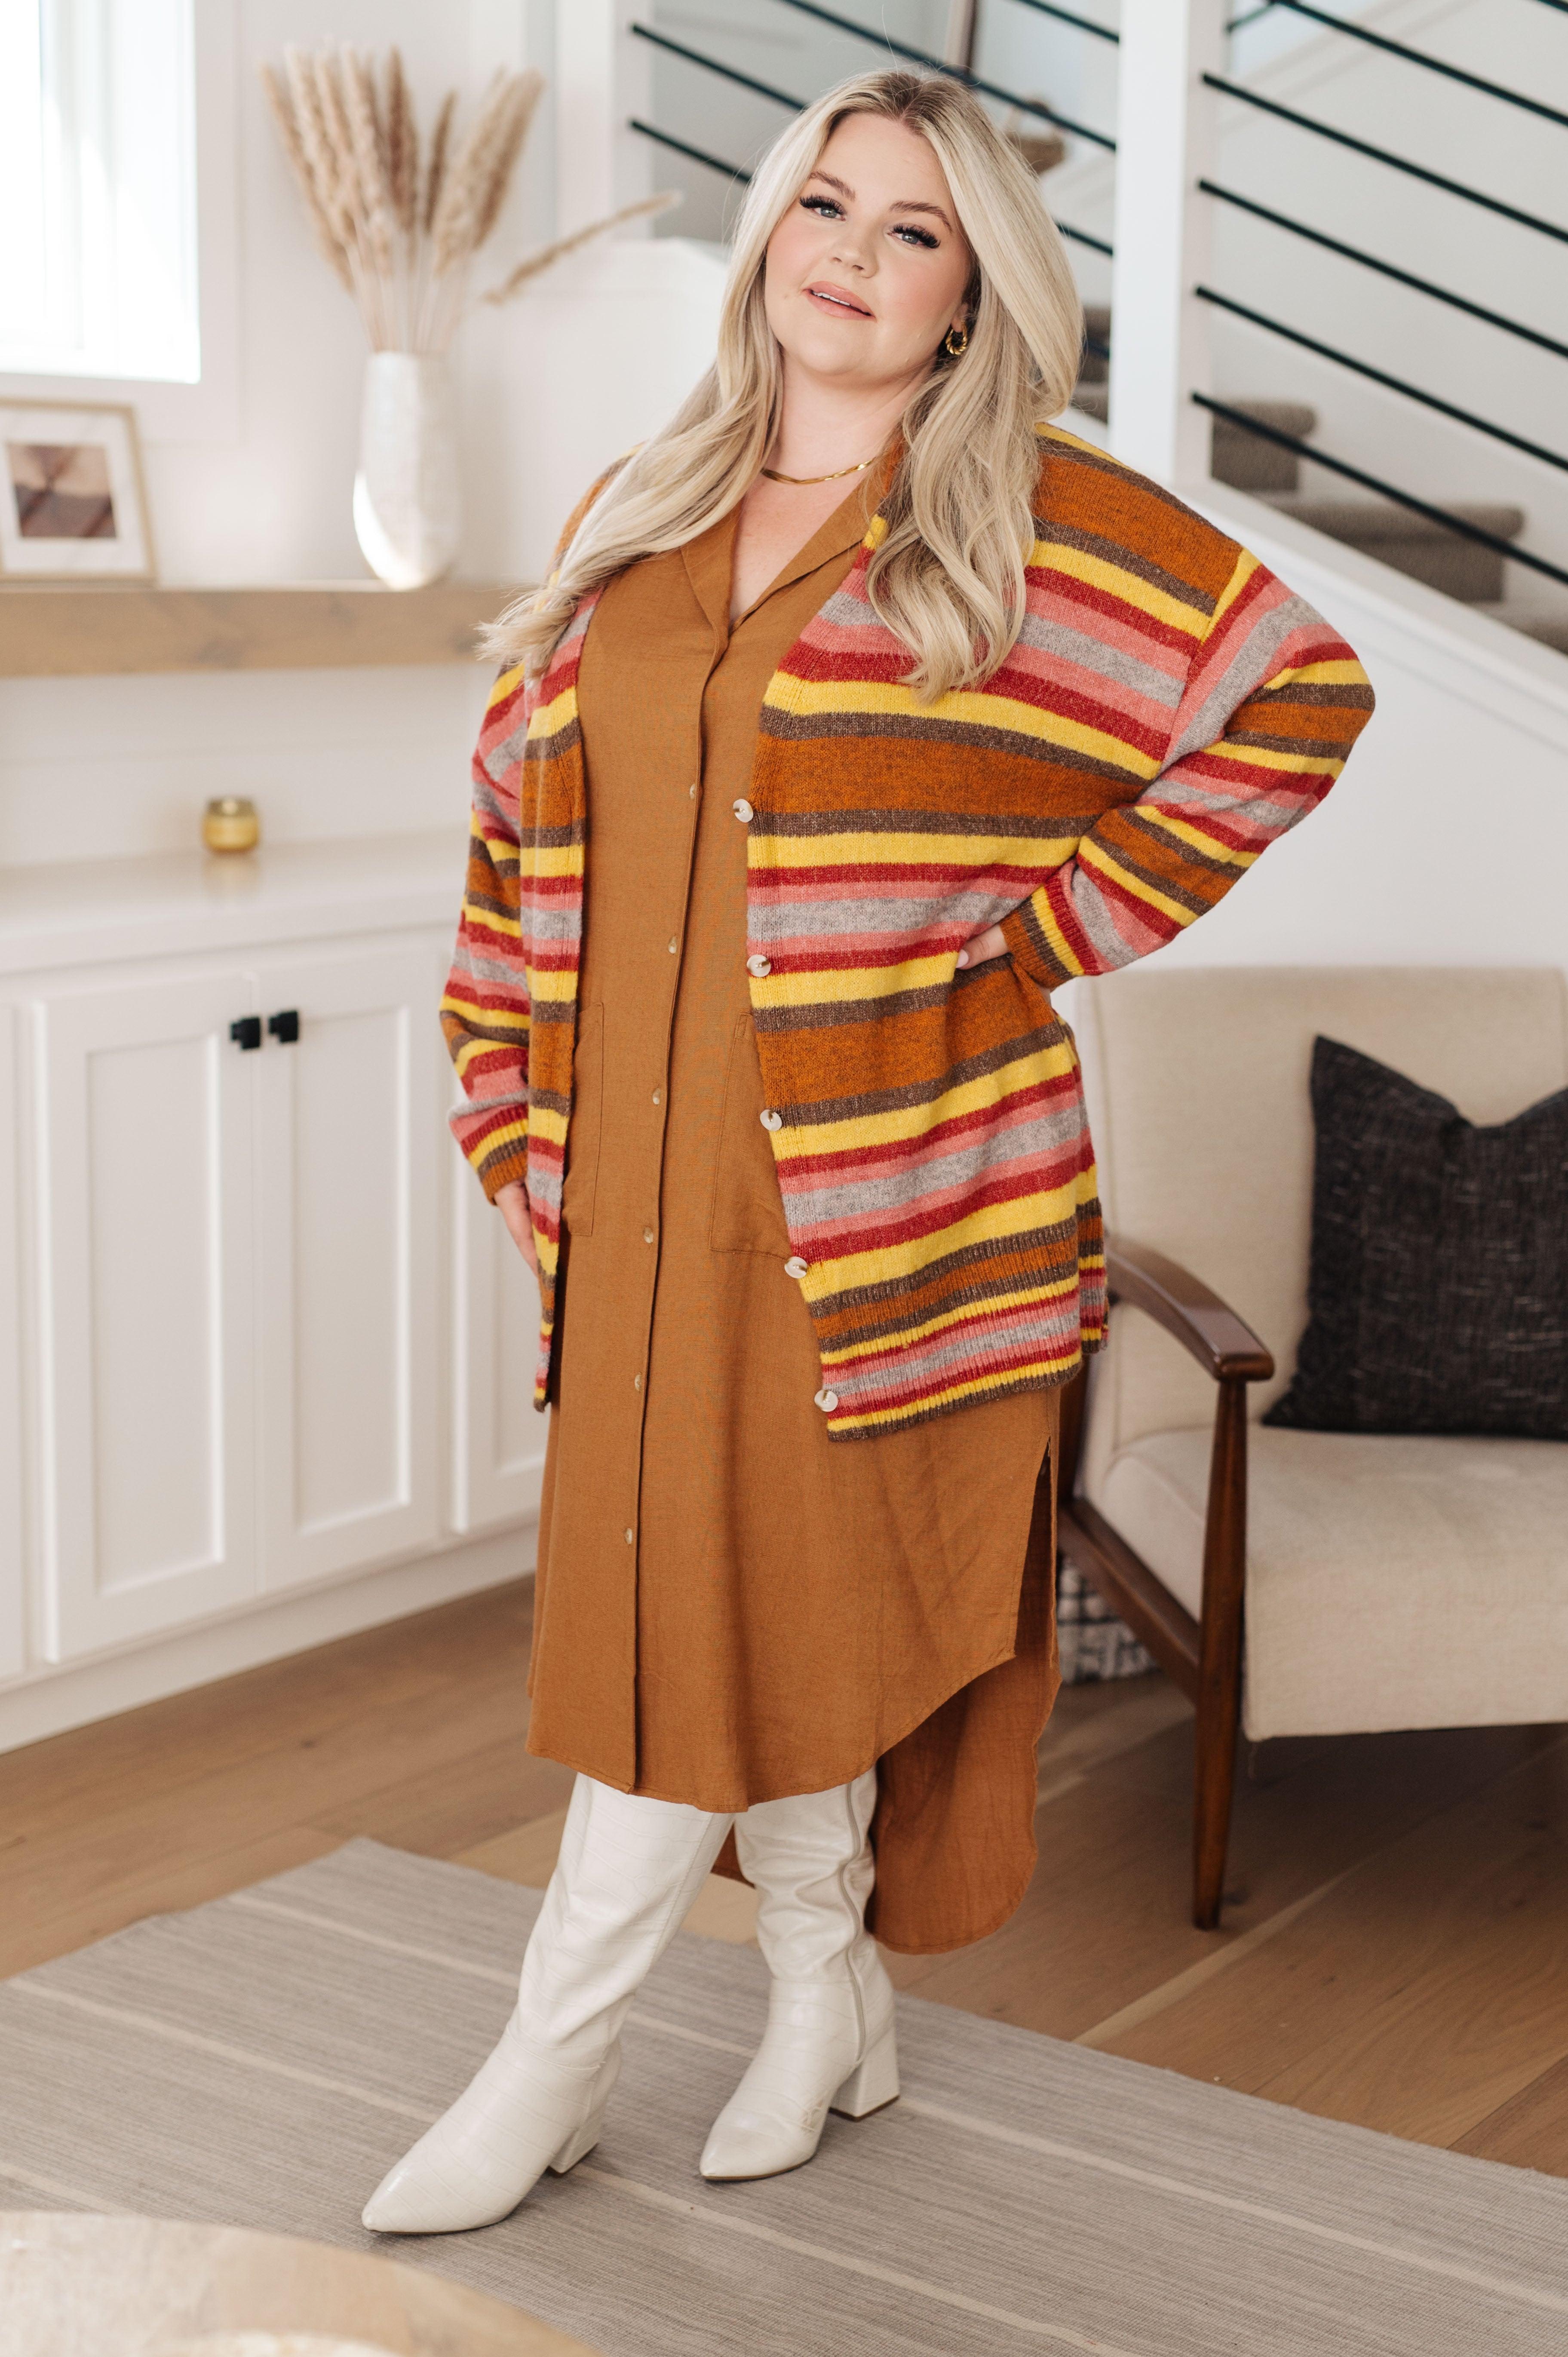 Henny Penny Striped Cardigan Womens Ave Shops   